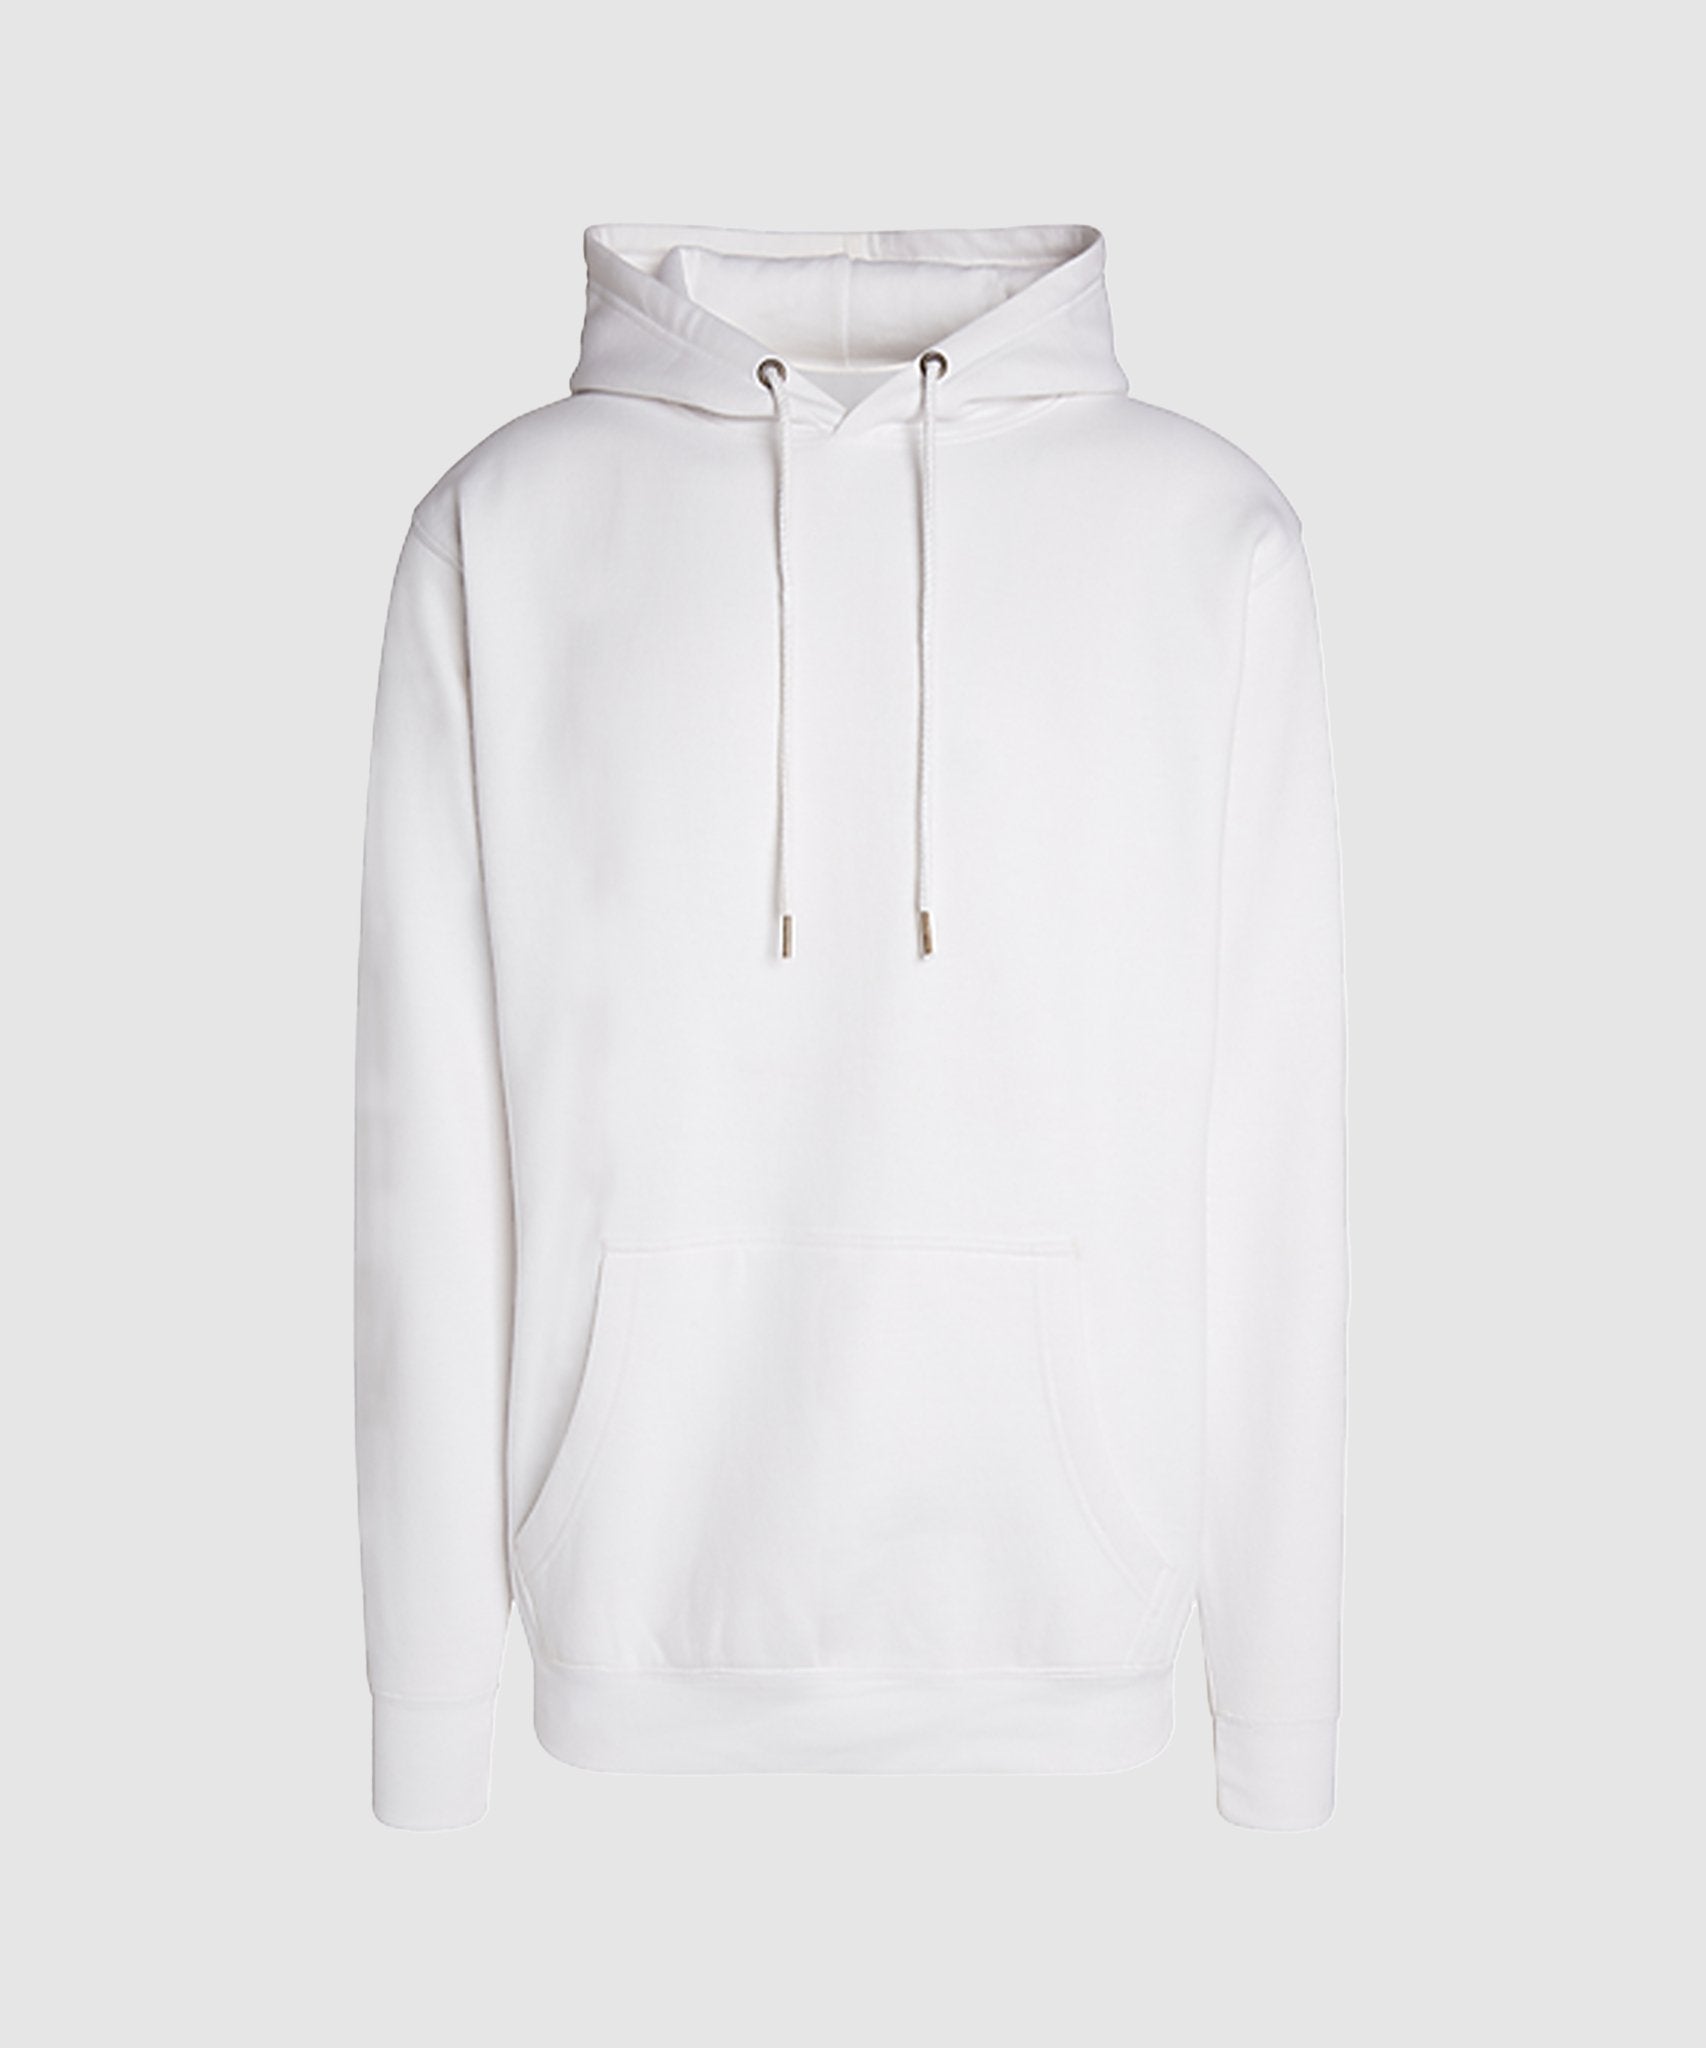 GWPHZS9001 - G West Unisex Essential Pullover Hoodie - 12 Colors (SHIPS IMMEDIATELY) - G West Blanks